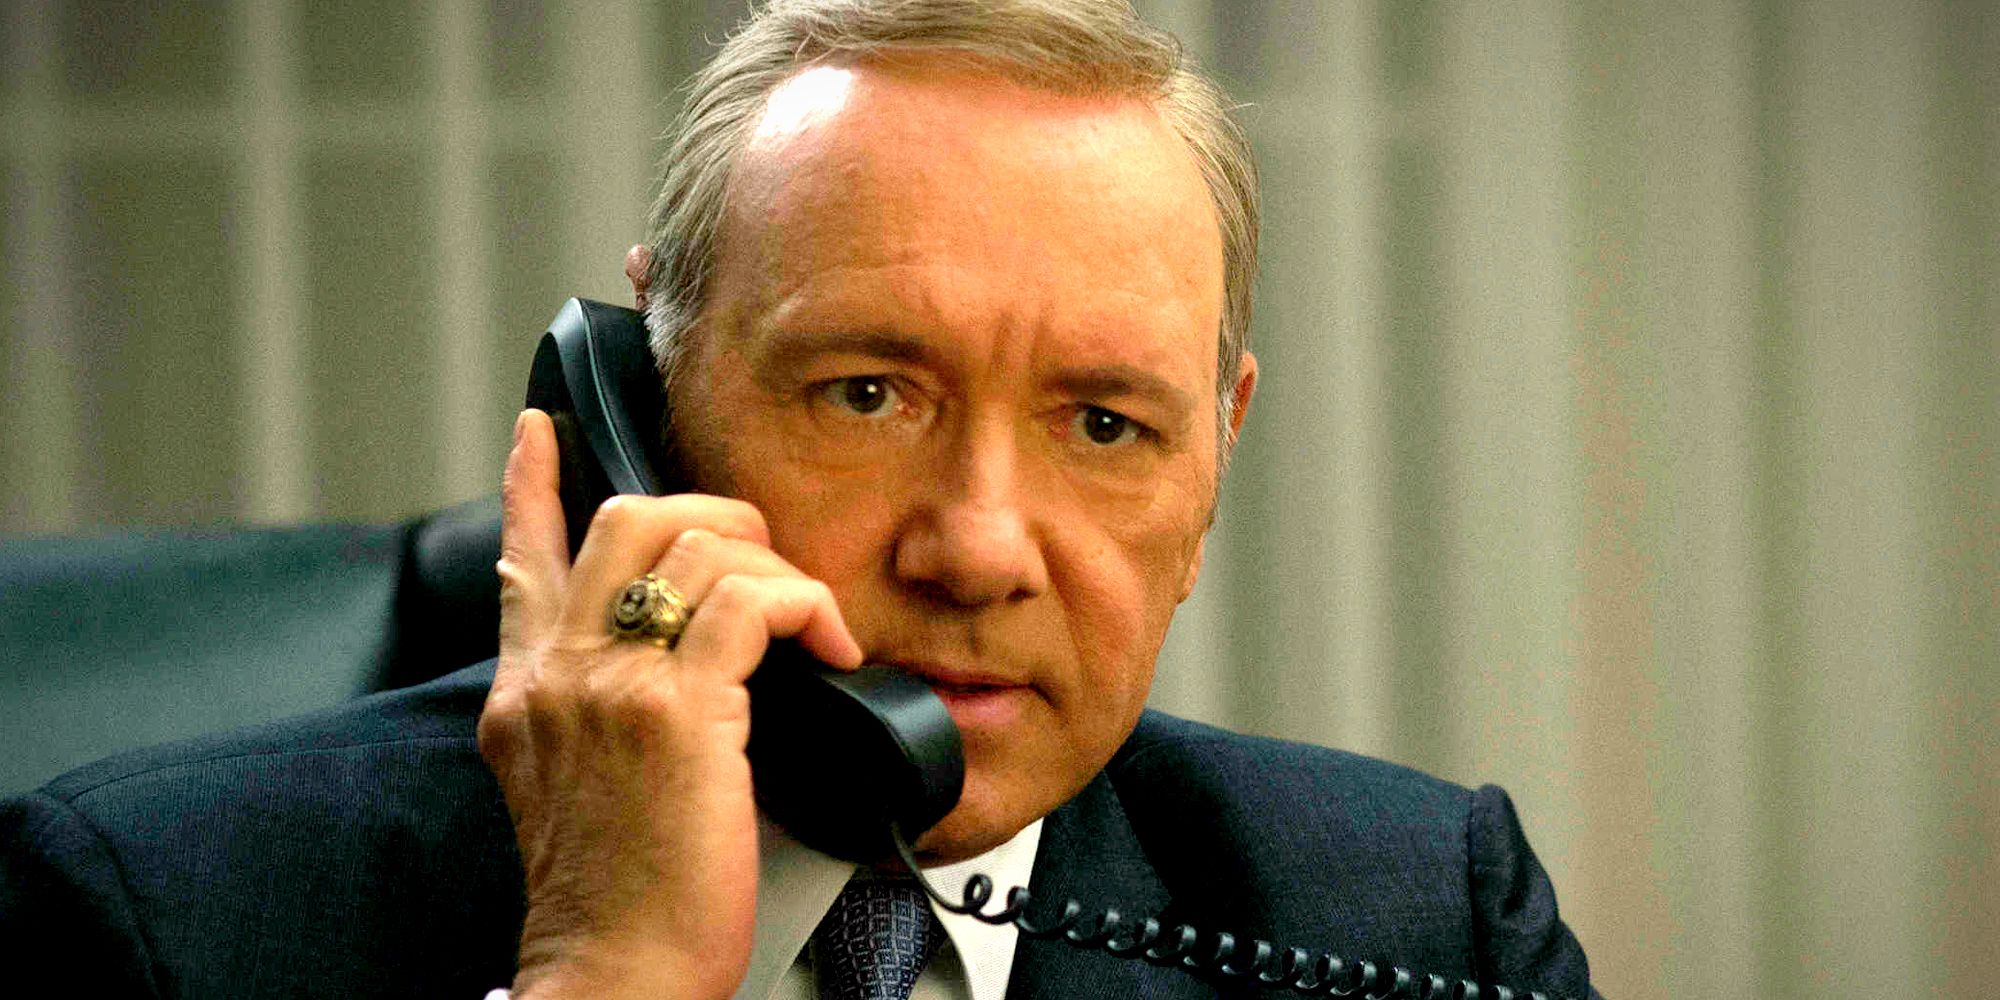 Kevin Spacey To Star In Biggest New Movie Since 2017